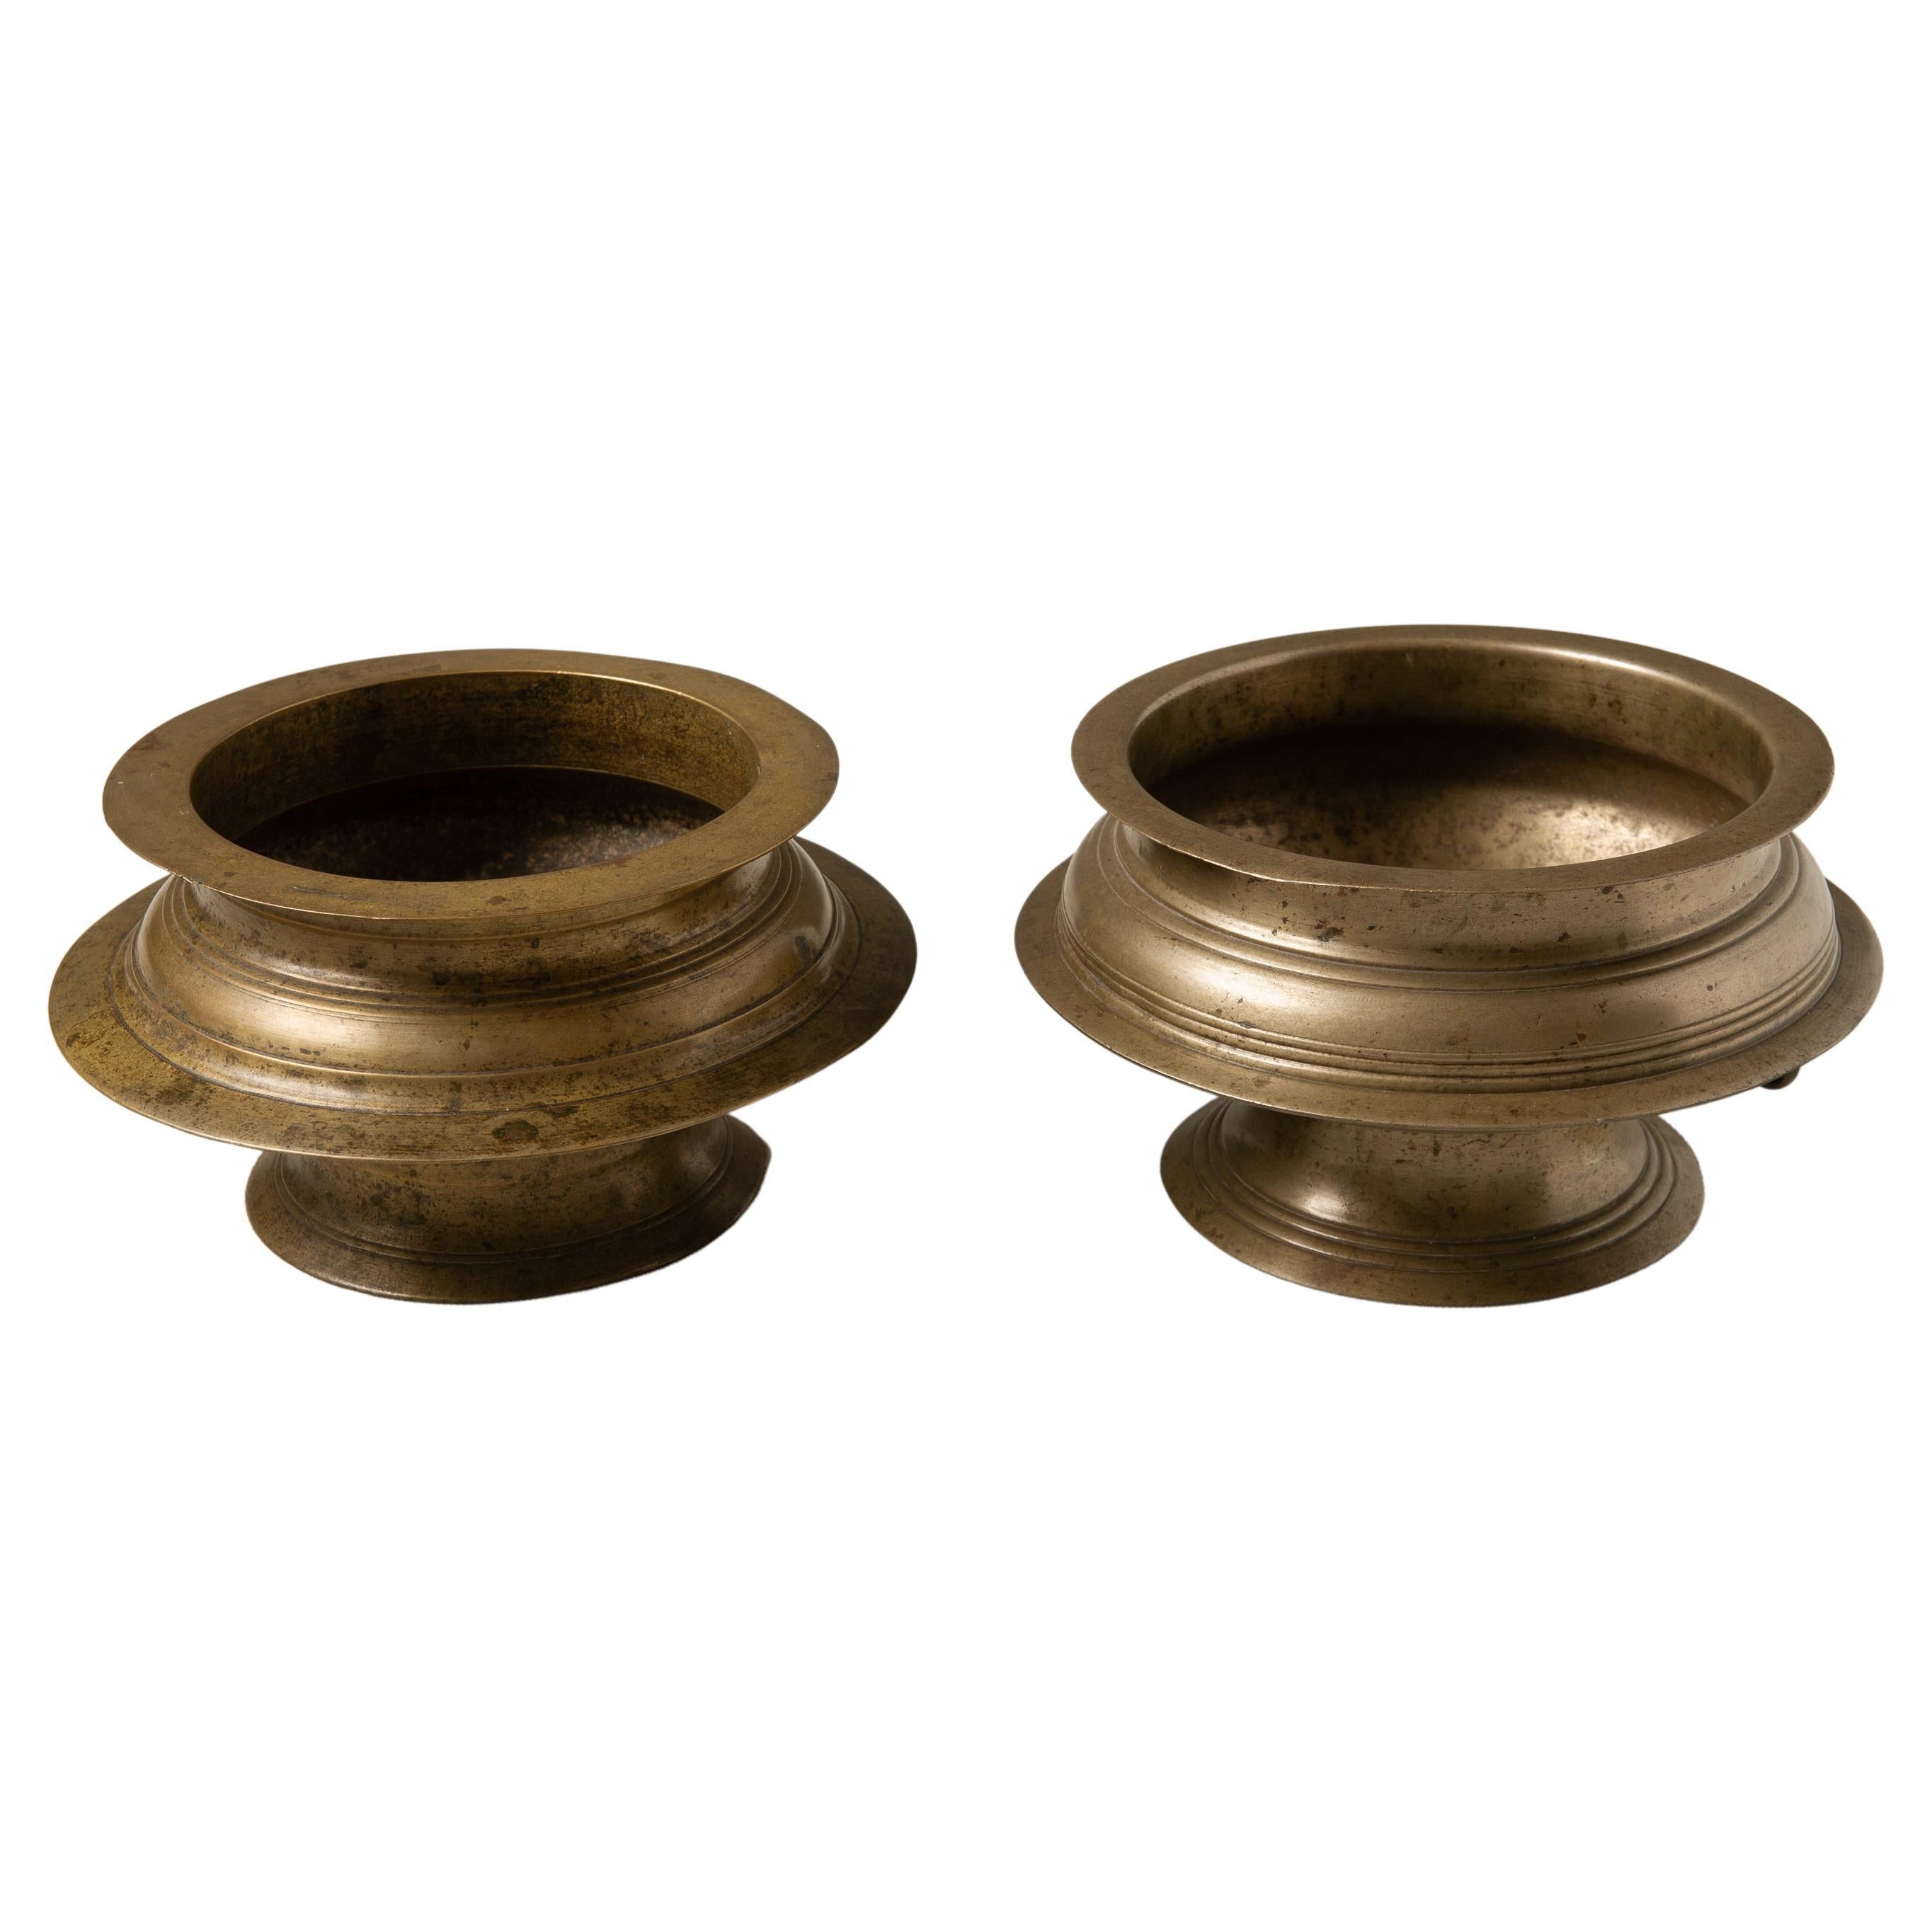 Bronze Temple Bowls from Kerala